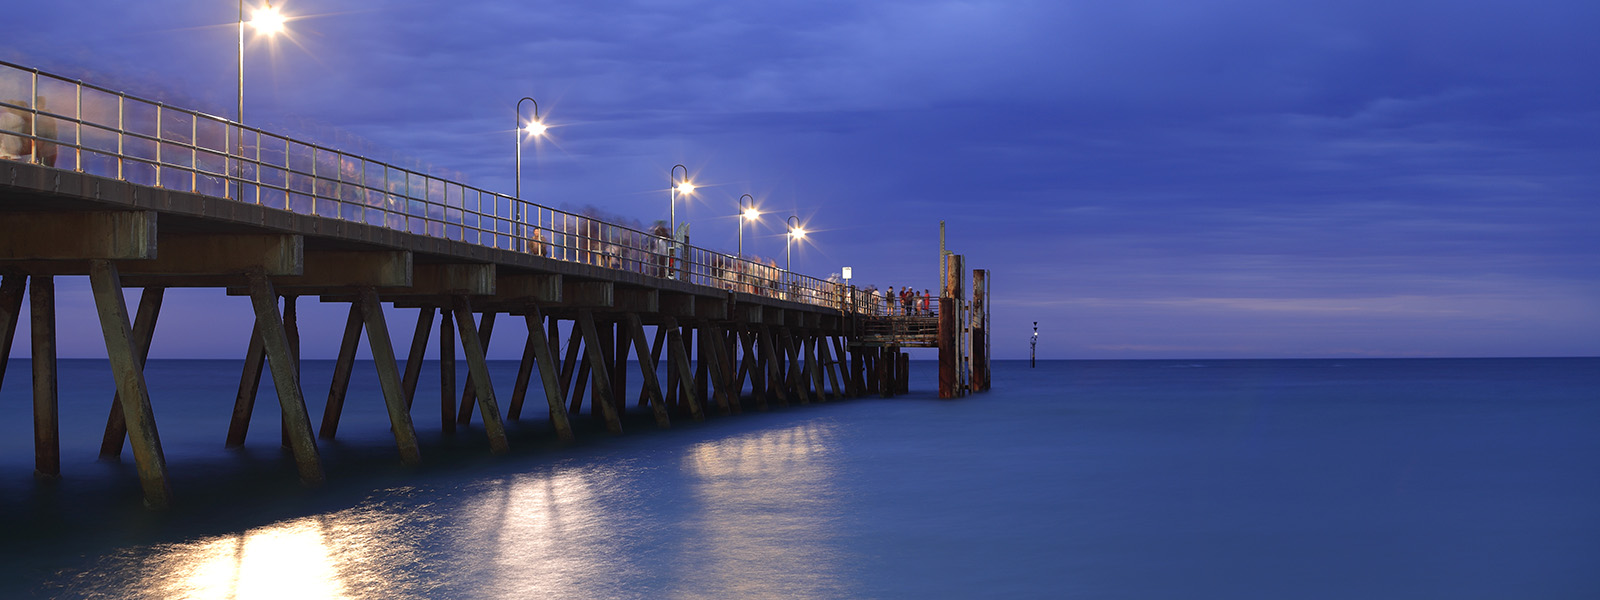 A pier bathed in light